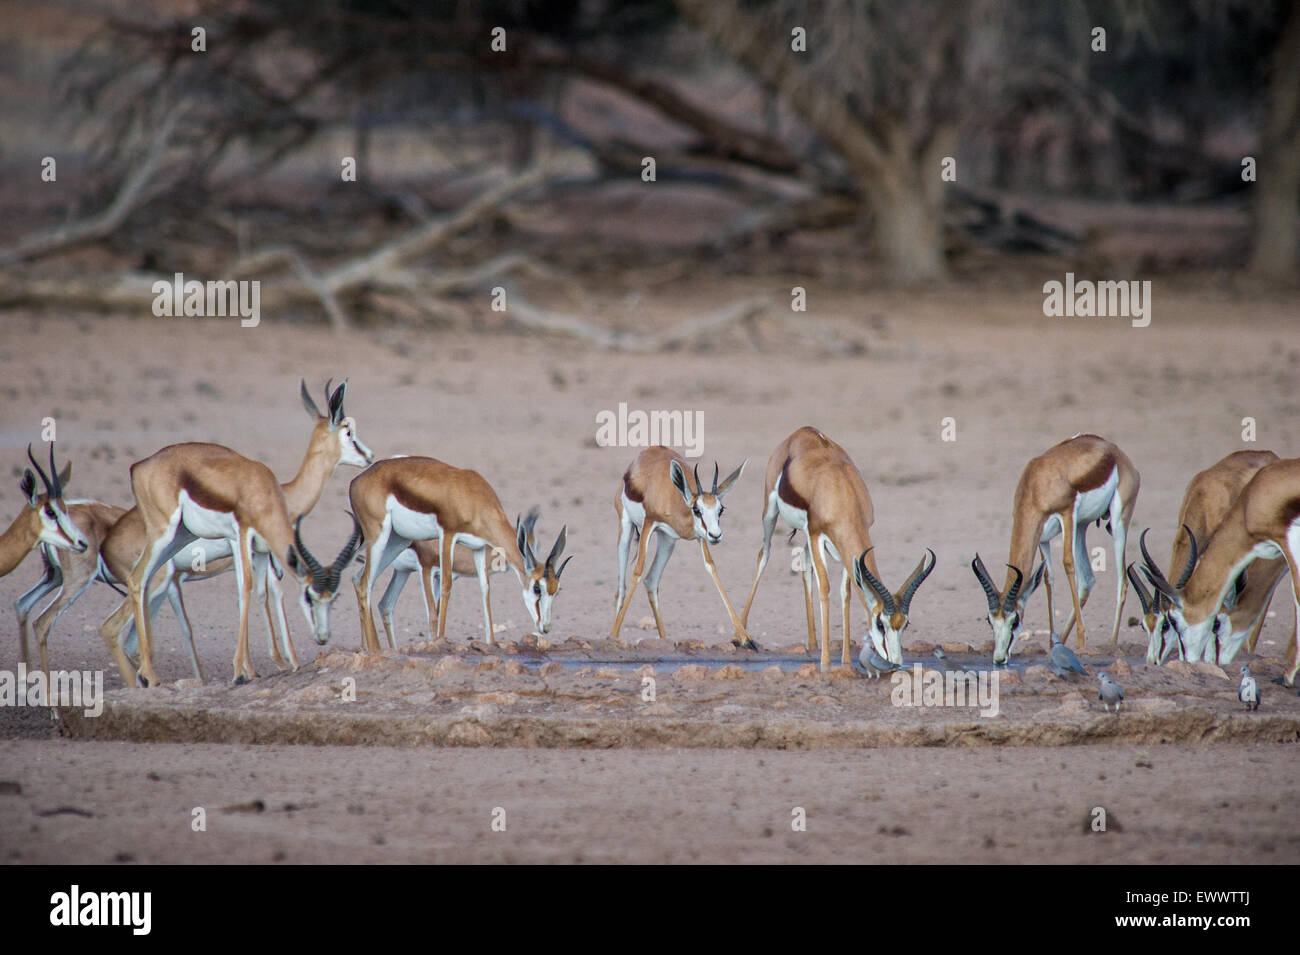 Namibia, Africa - Wild springbok drinking water at a watering hole as a pack Stock Photo